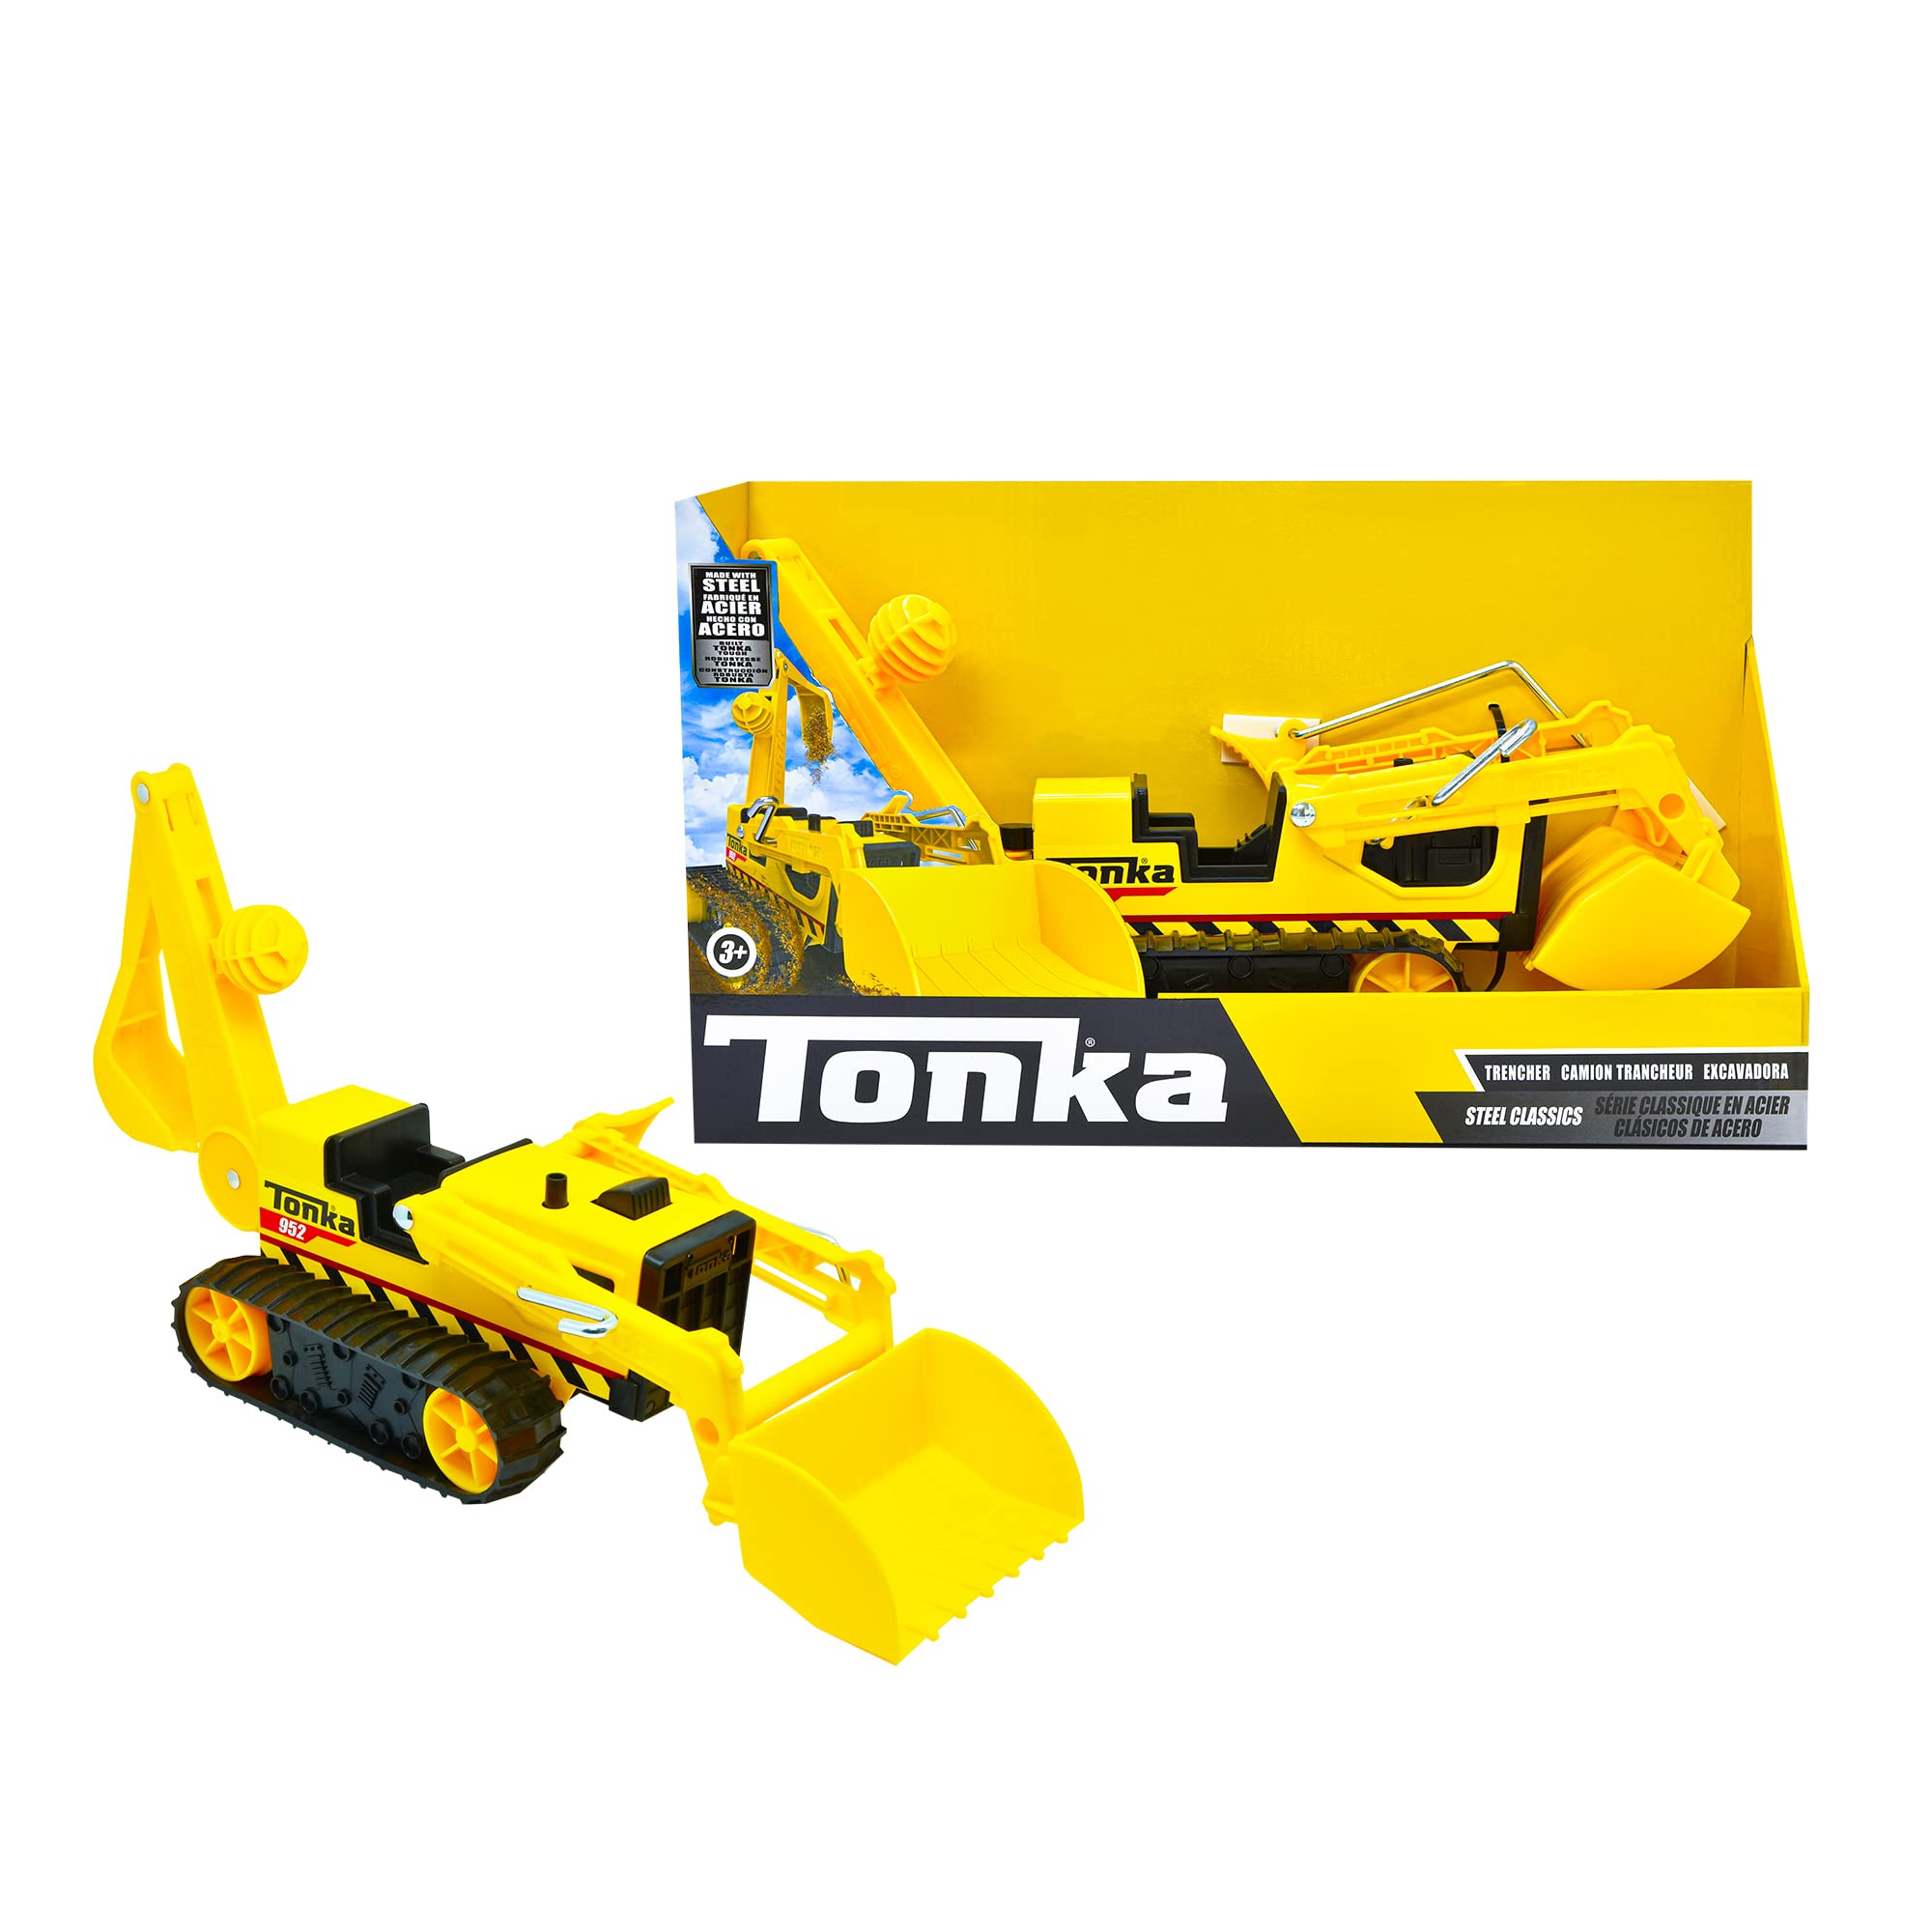 16.25" Tonka Steel Classics Toy Trencher $6.60 + Free Shipping w/ Prime or on $25+